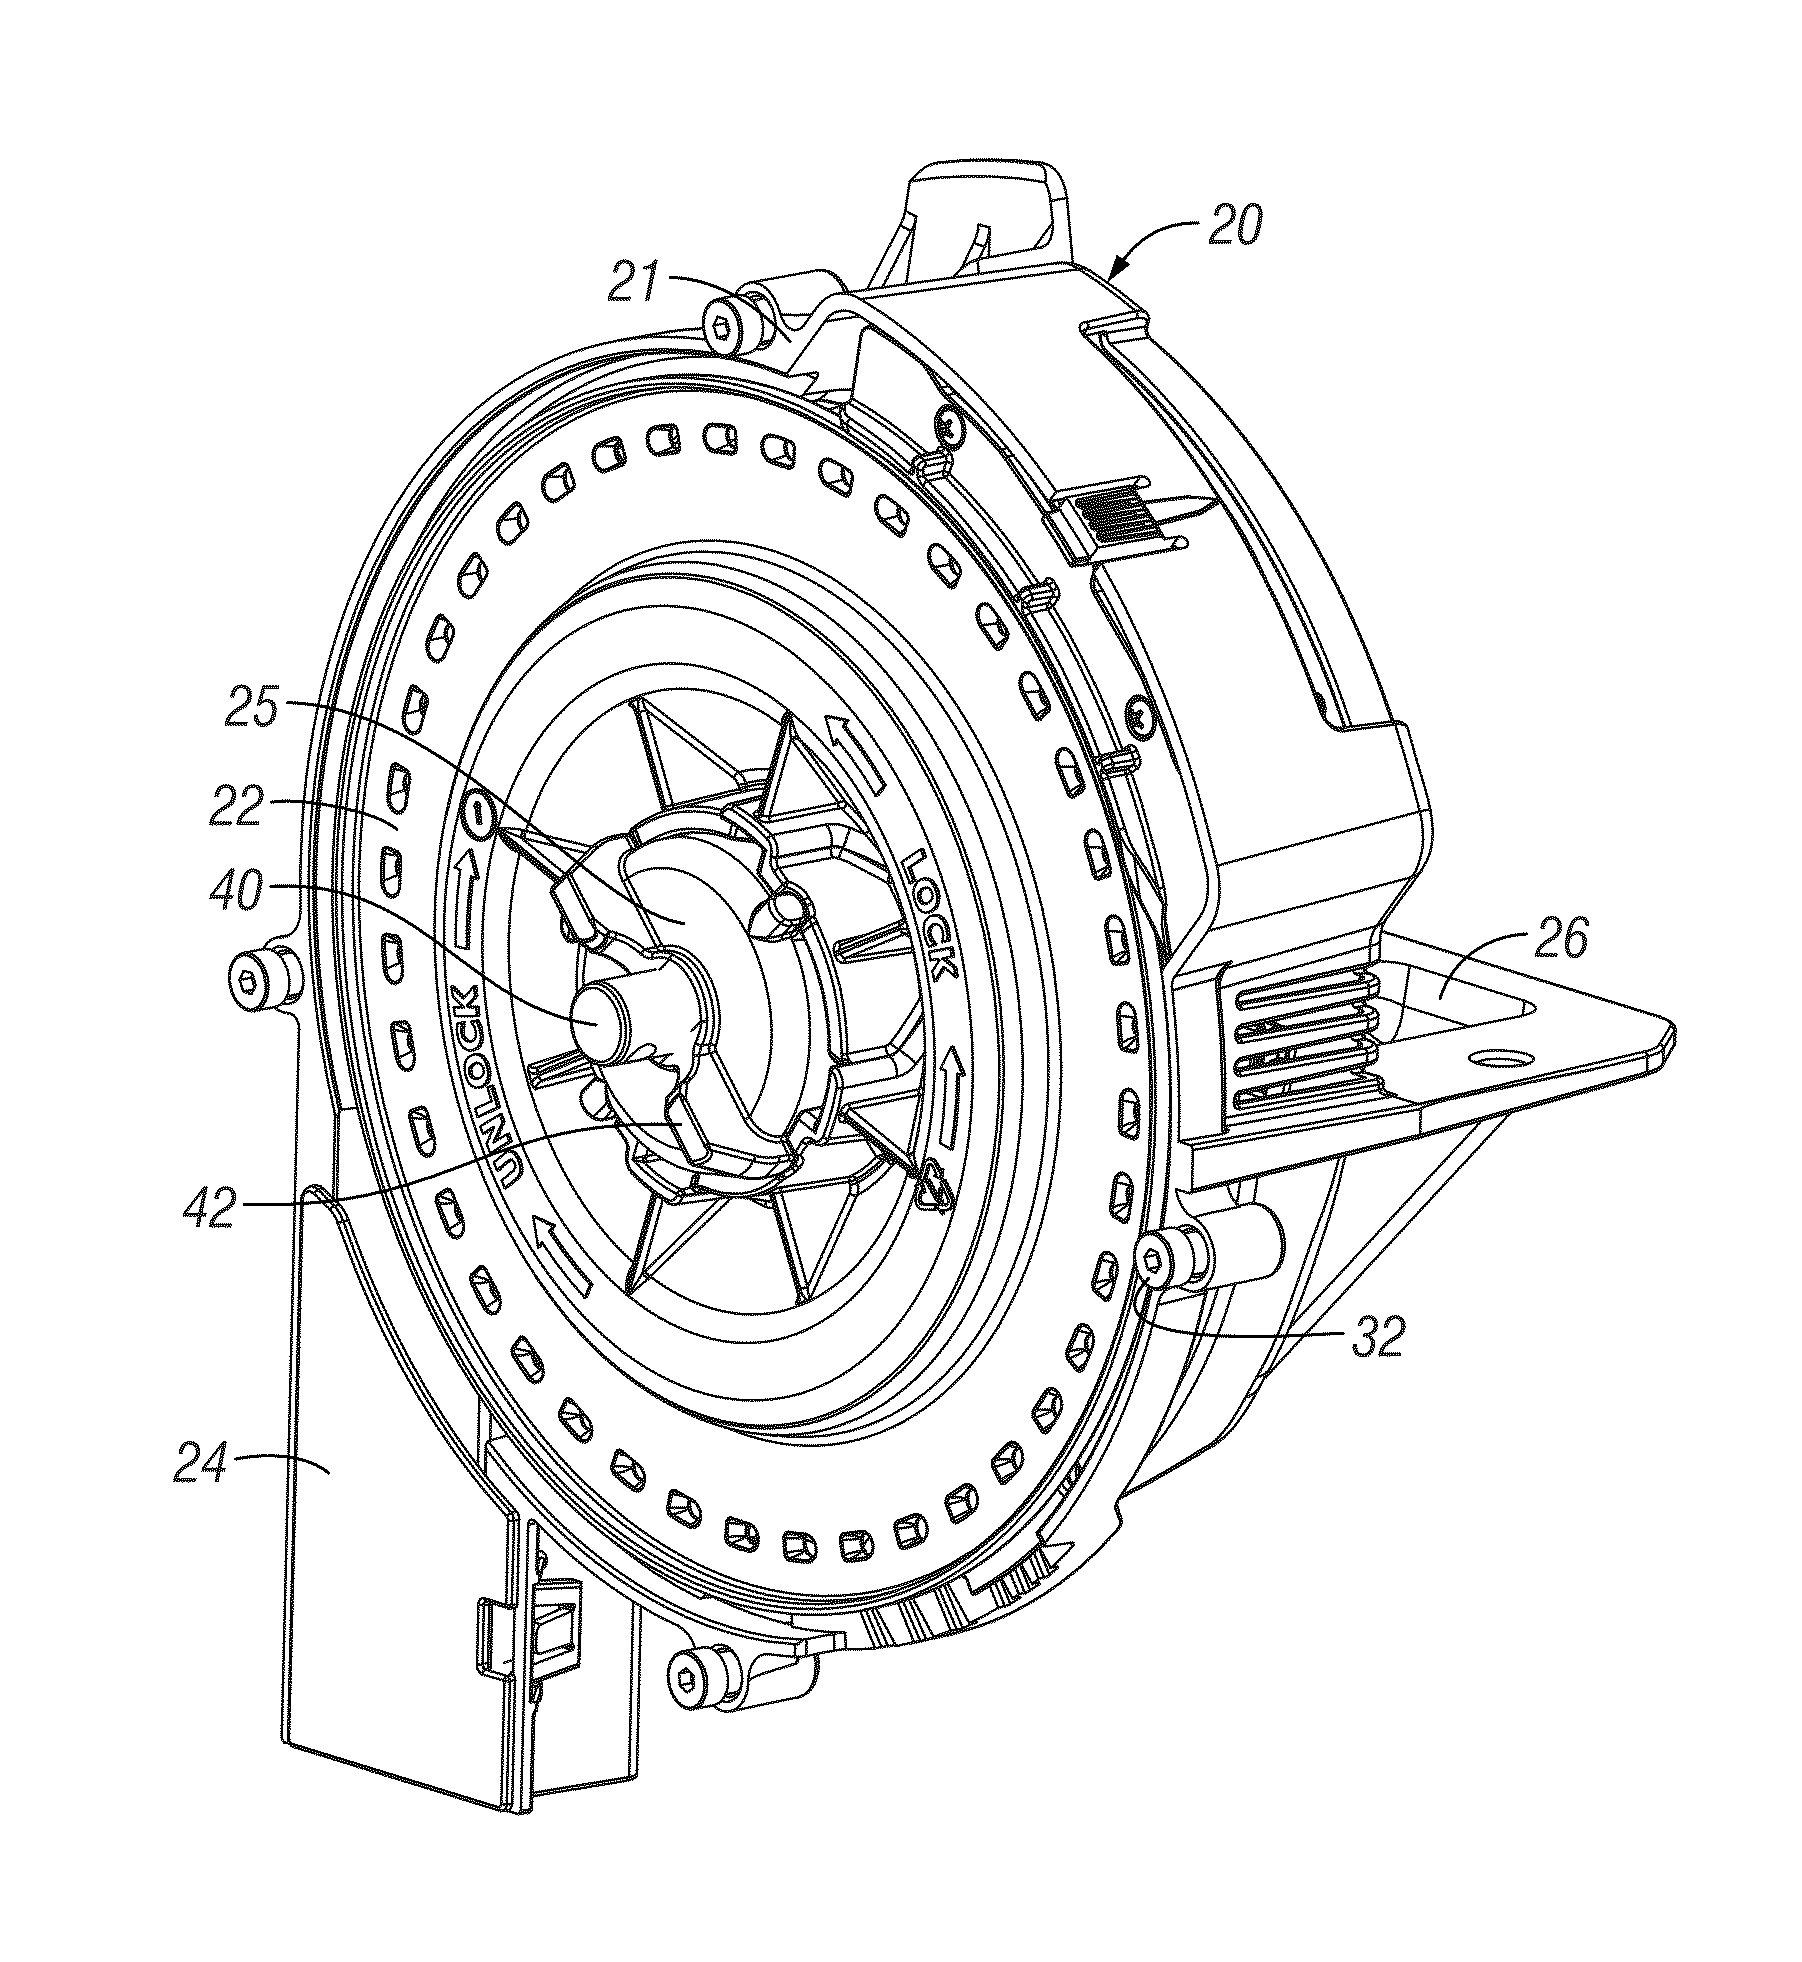 Air seed meter disc with flow directing pockets